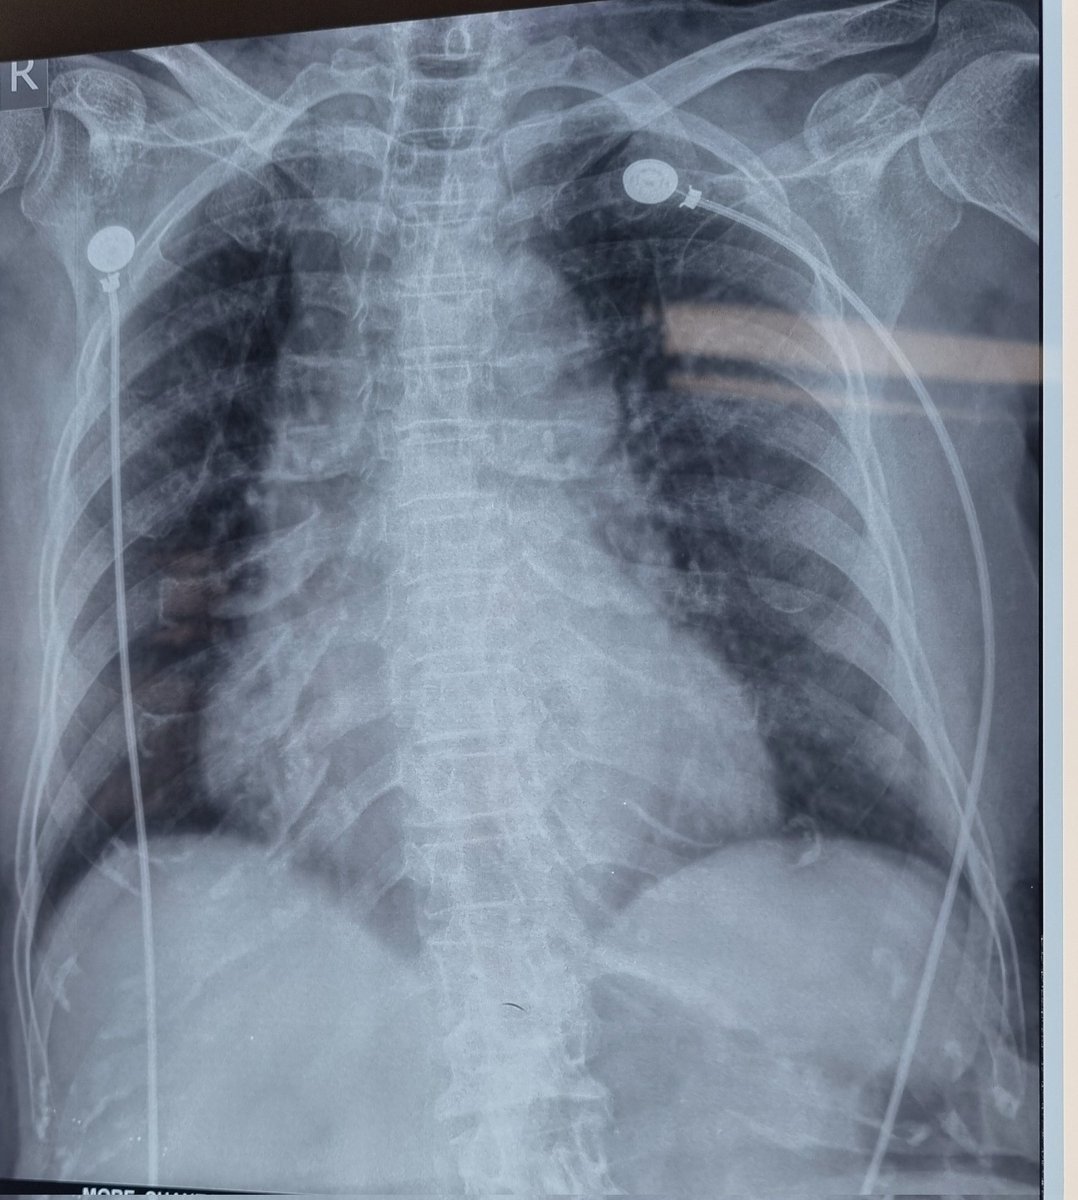 Anything unusual in this cxr of CKD patient??
#MedTwitter
#asknephron
#radiologicalillustration